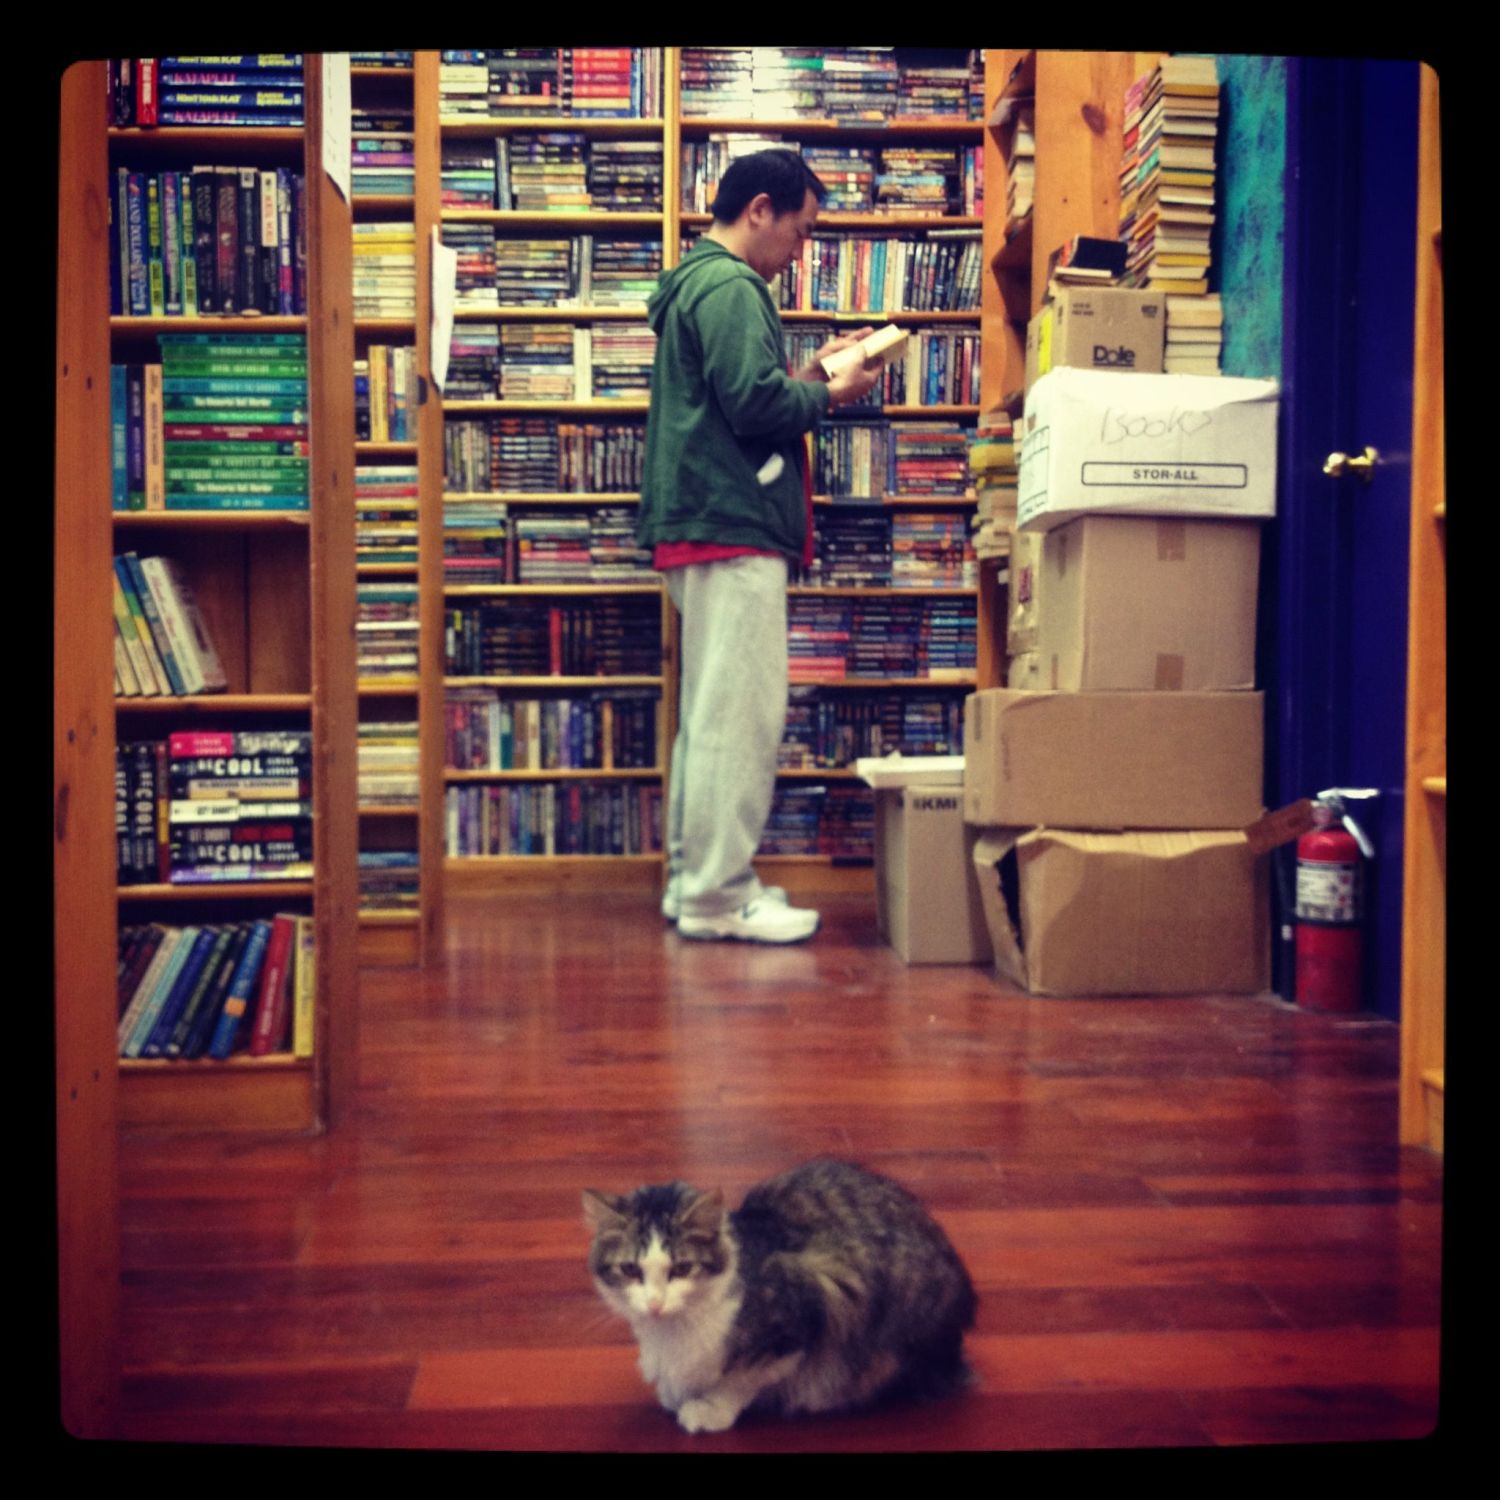 Man in bookstore, with cat, thinking about editing.